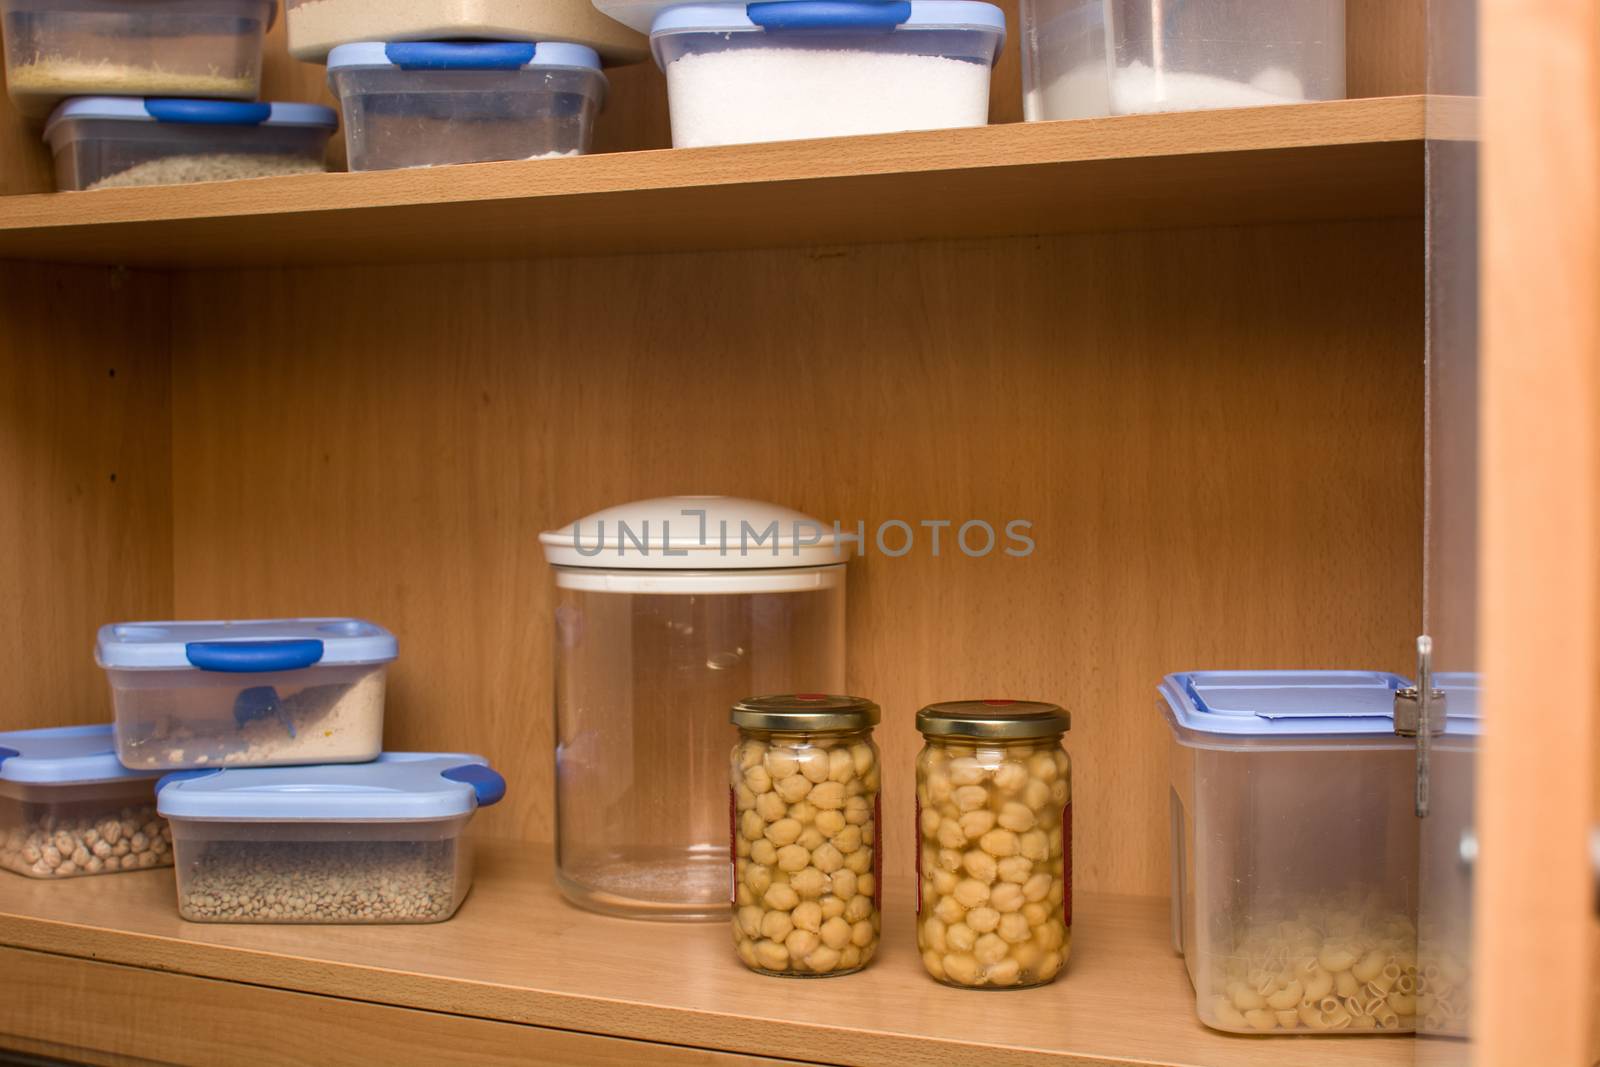 Food kitchen pantry for quarantine for coronavirus covid-19 by chandlervid85